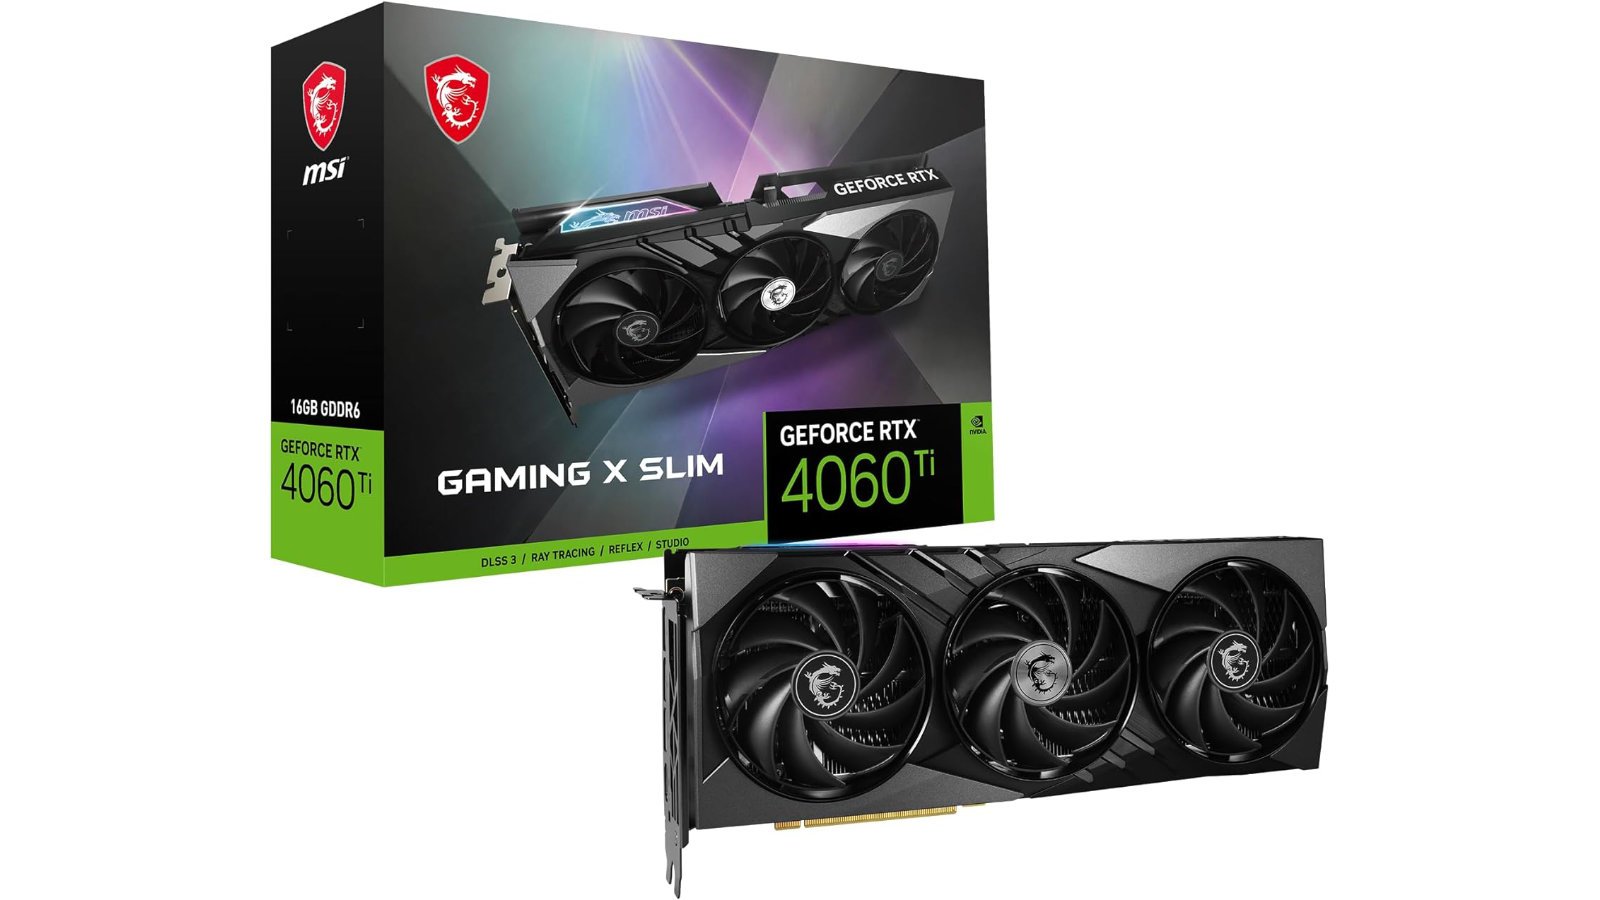 MSI GeForce RTX 4060 Ti Gaming Slim X graphics card against a white background.